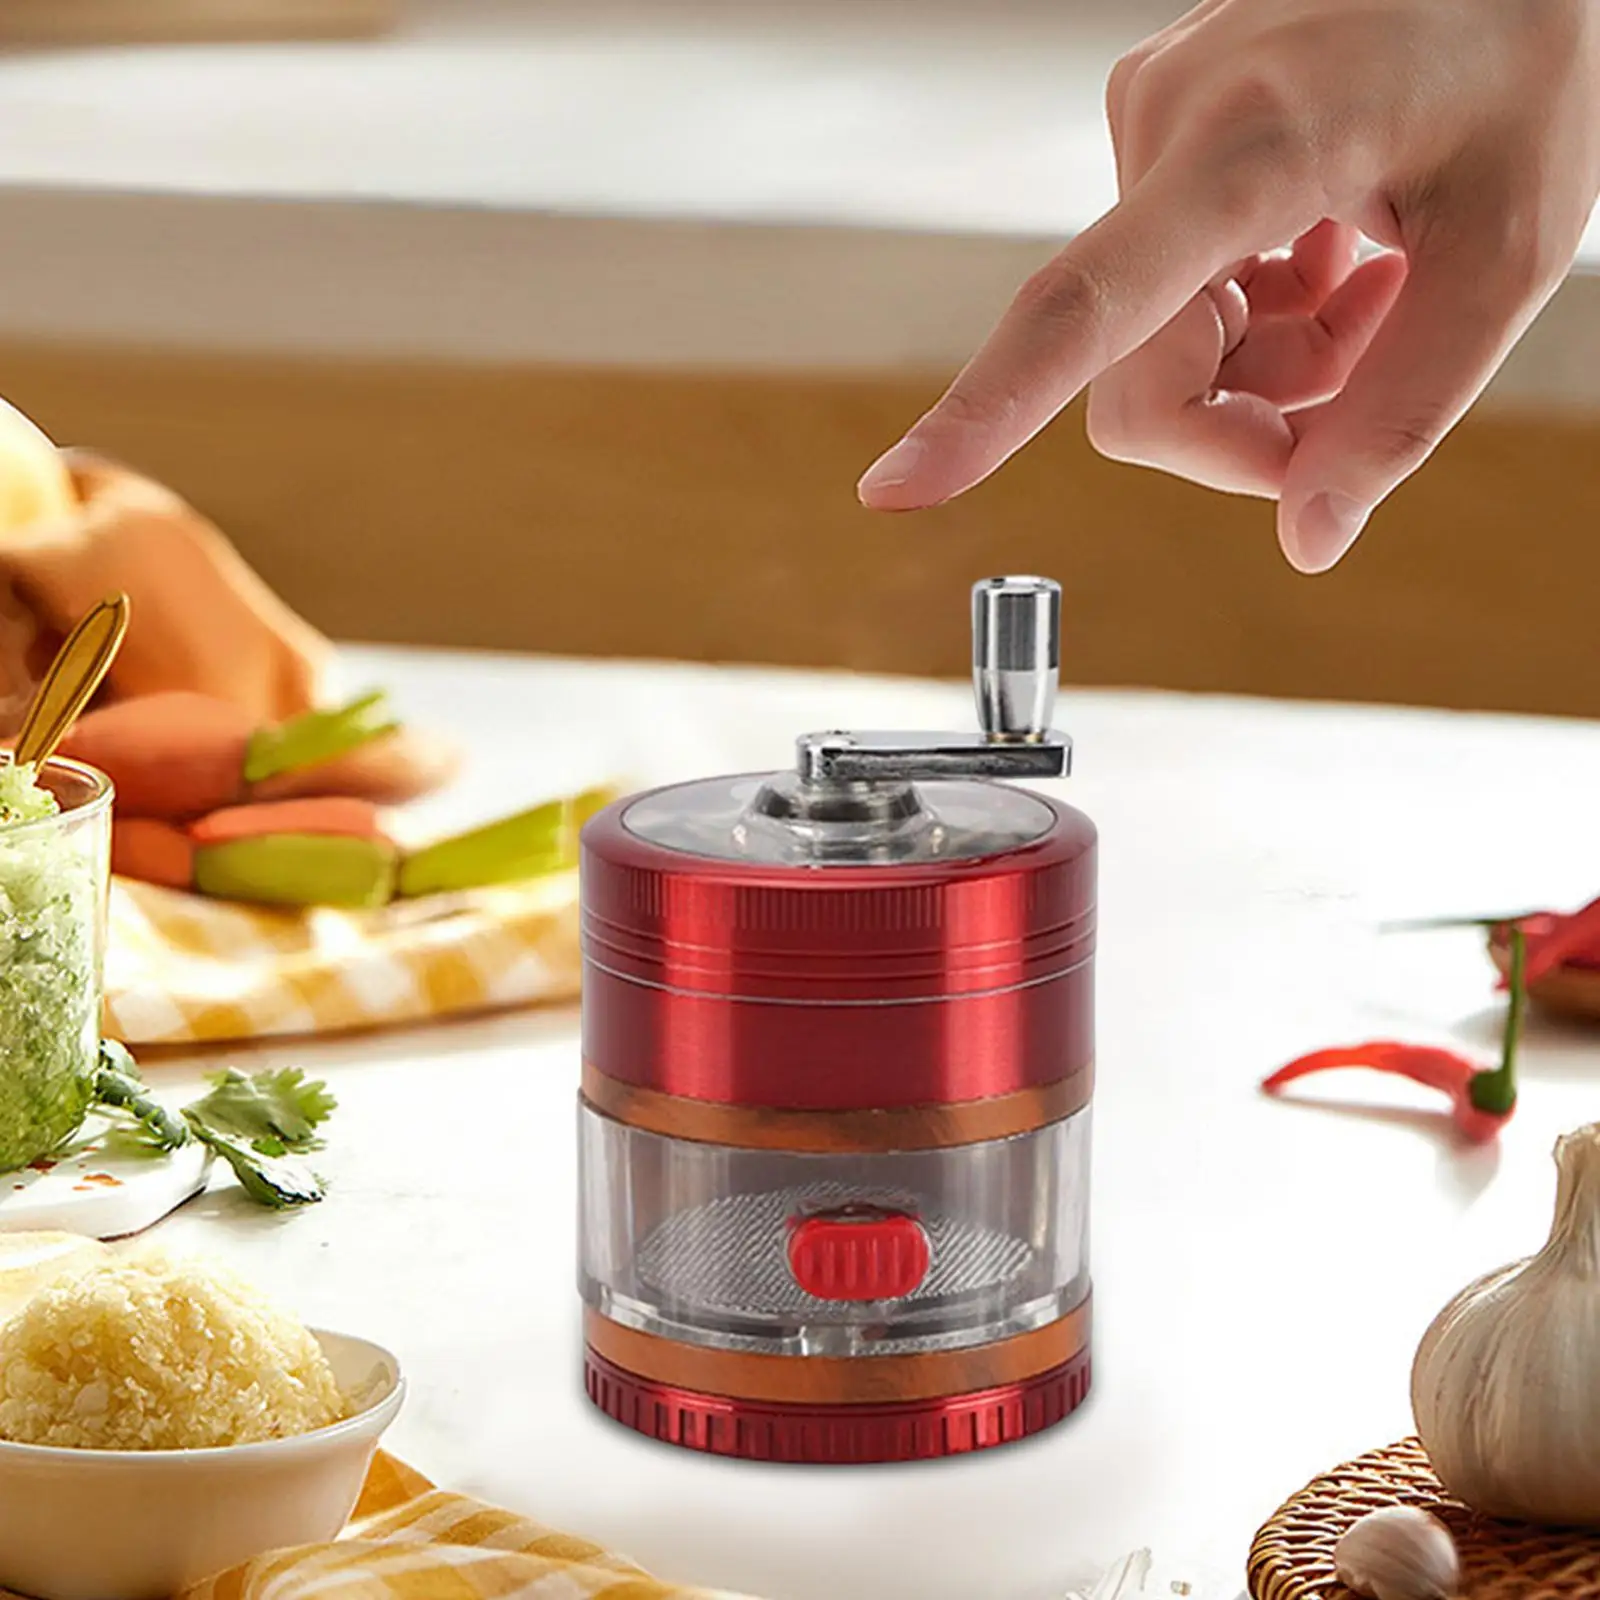 Metal Spice Grinder Easy to Use 4 Layers Multifunctional kitchen Gadgets Seasoning Mill Pepper Hand Crank Spice Miller